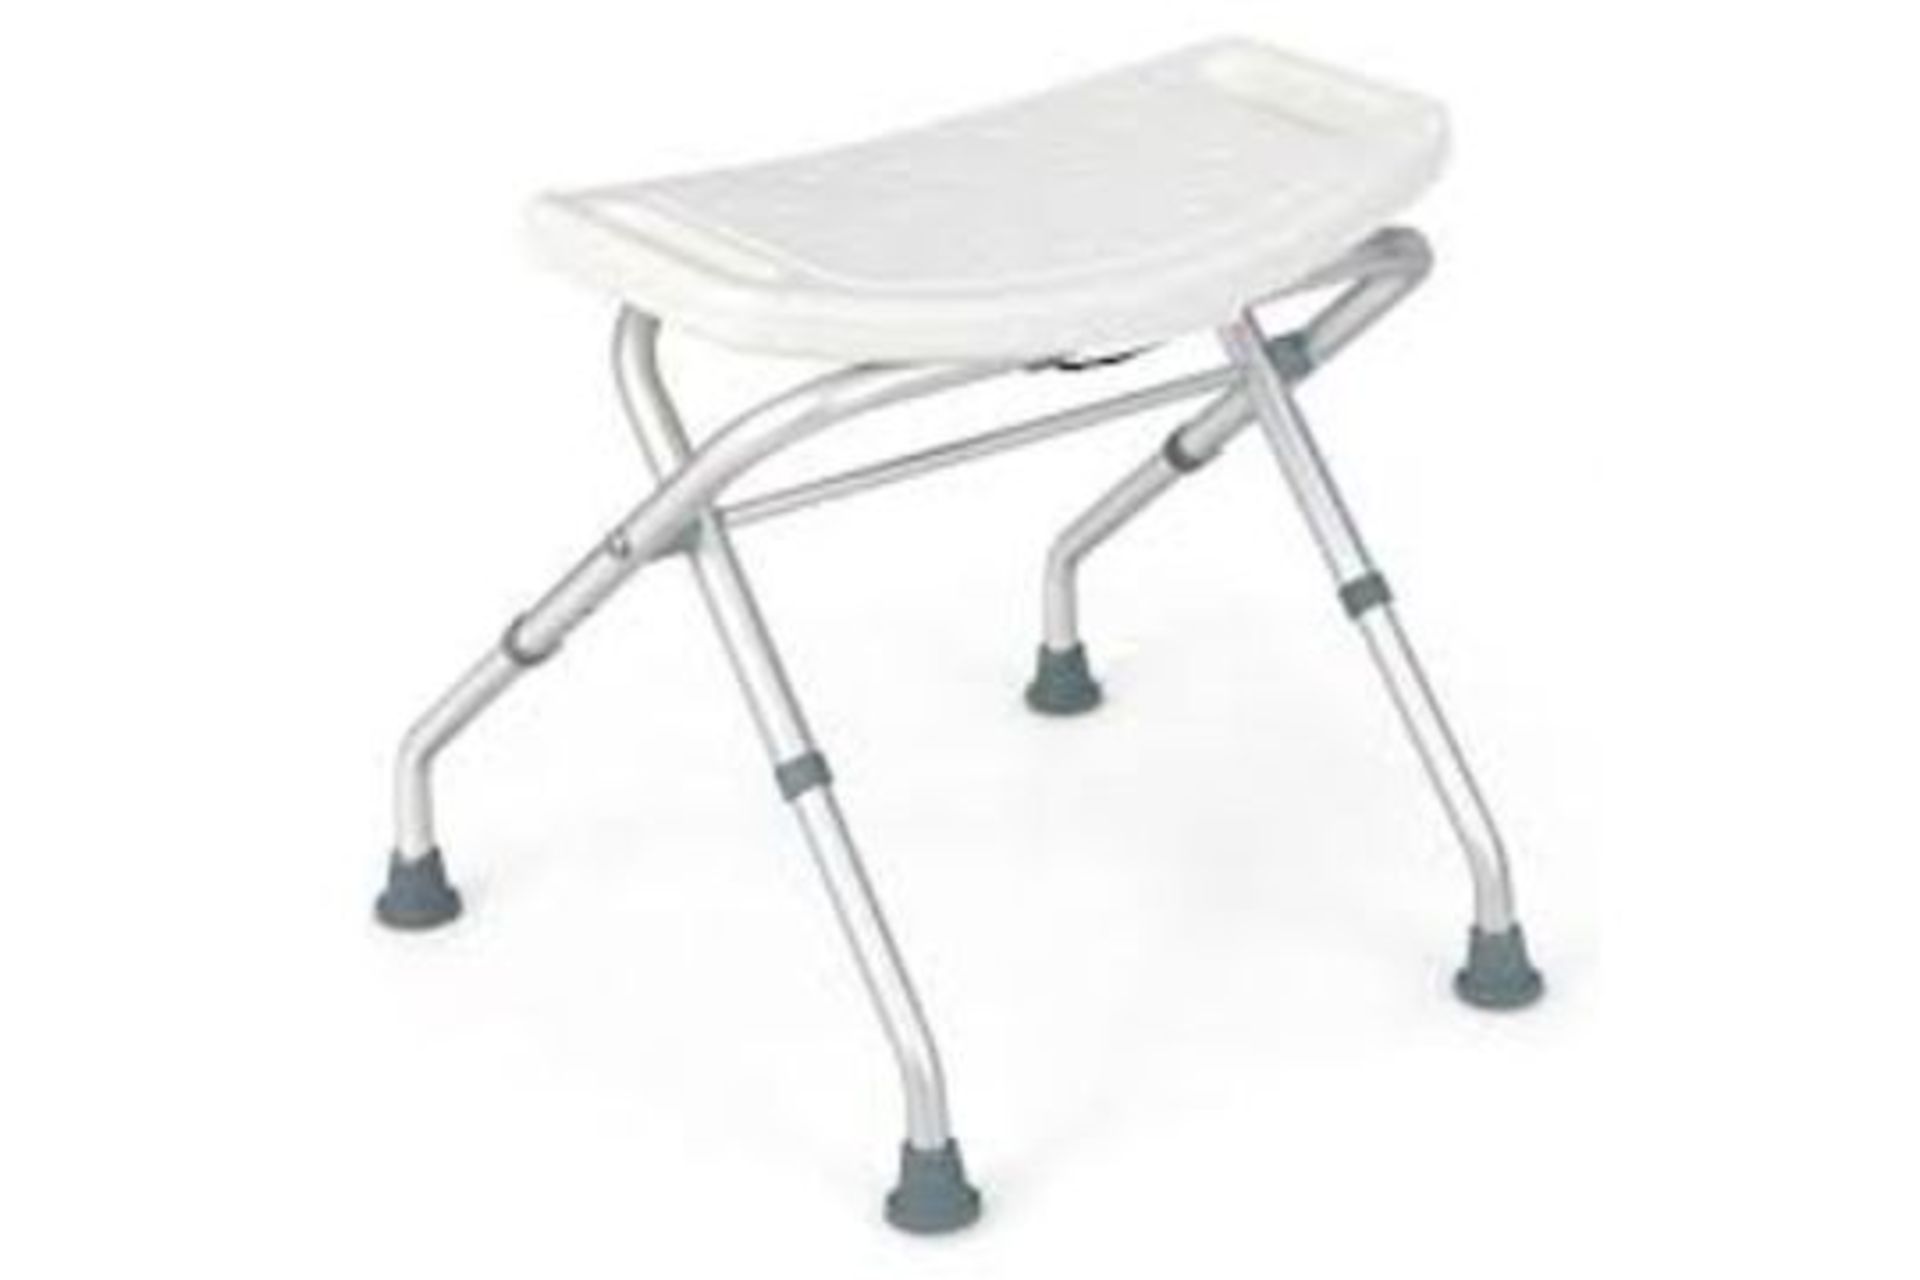 Folding Portable Shower Seat with Adjustable Height for Bathroom. - R14.16.